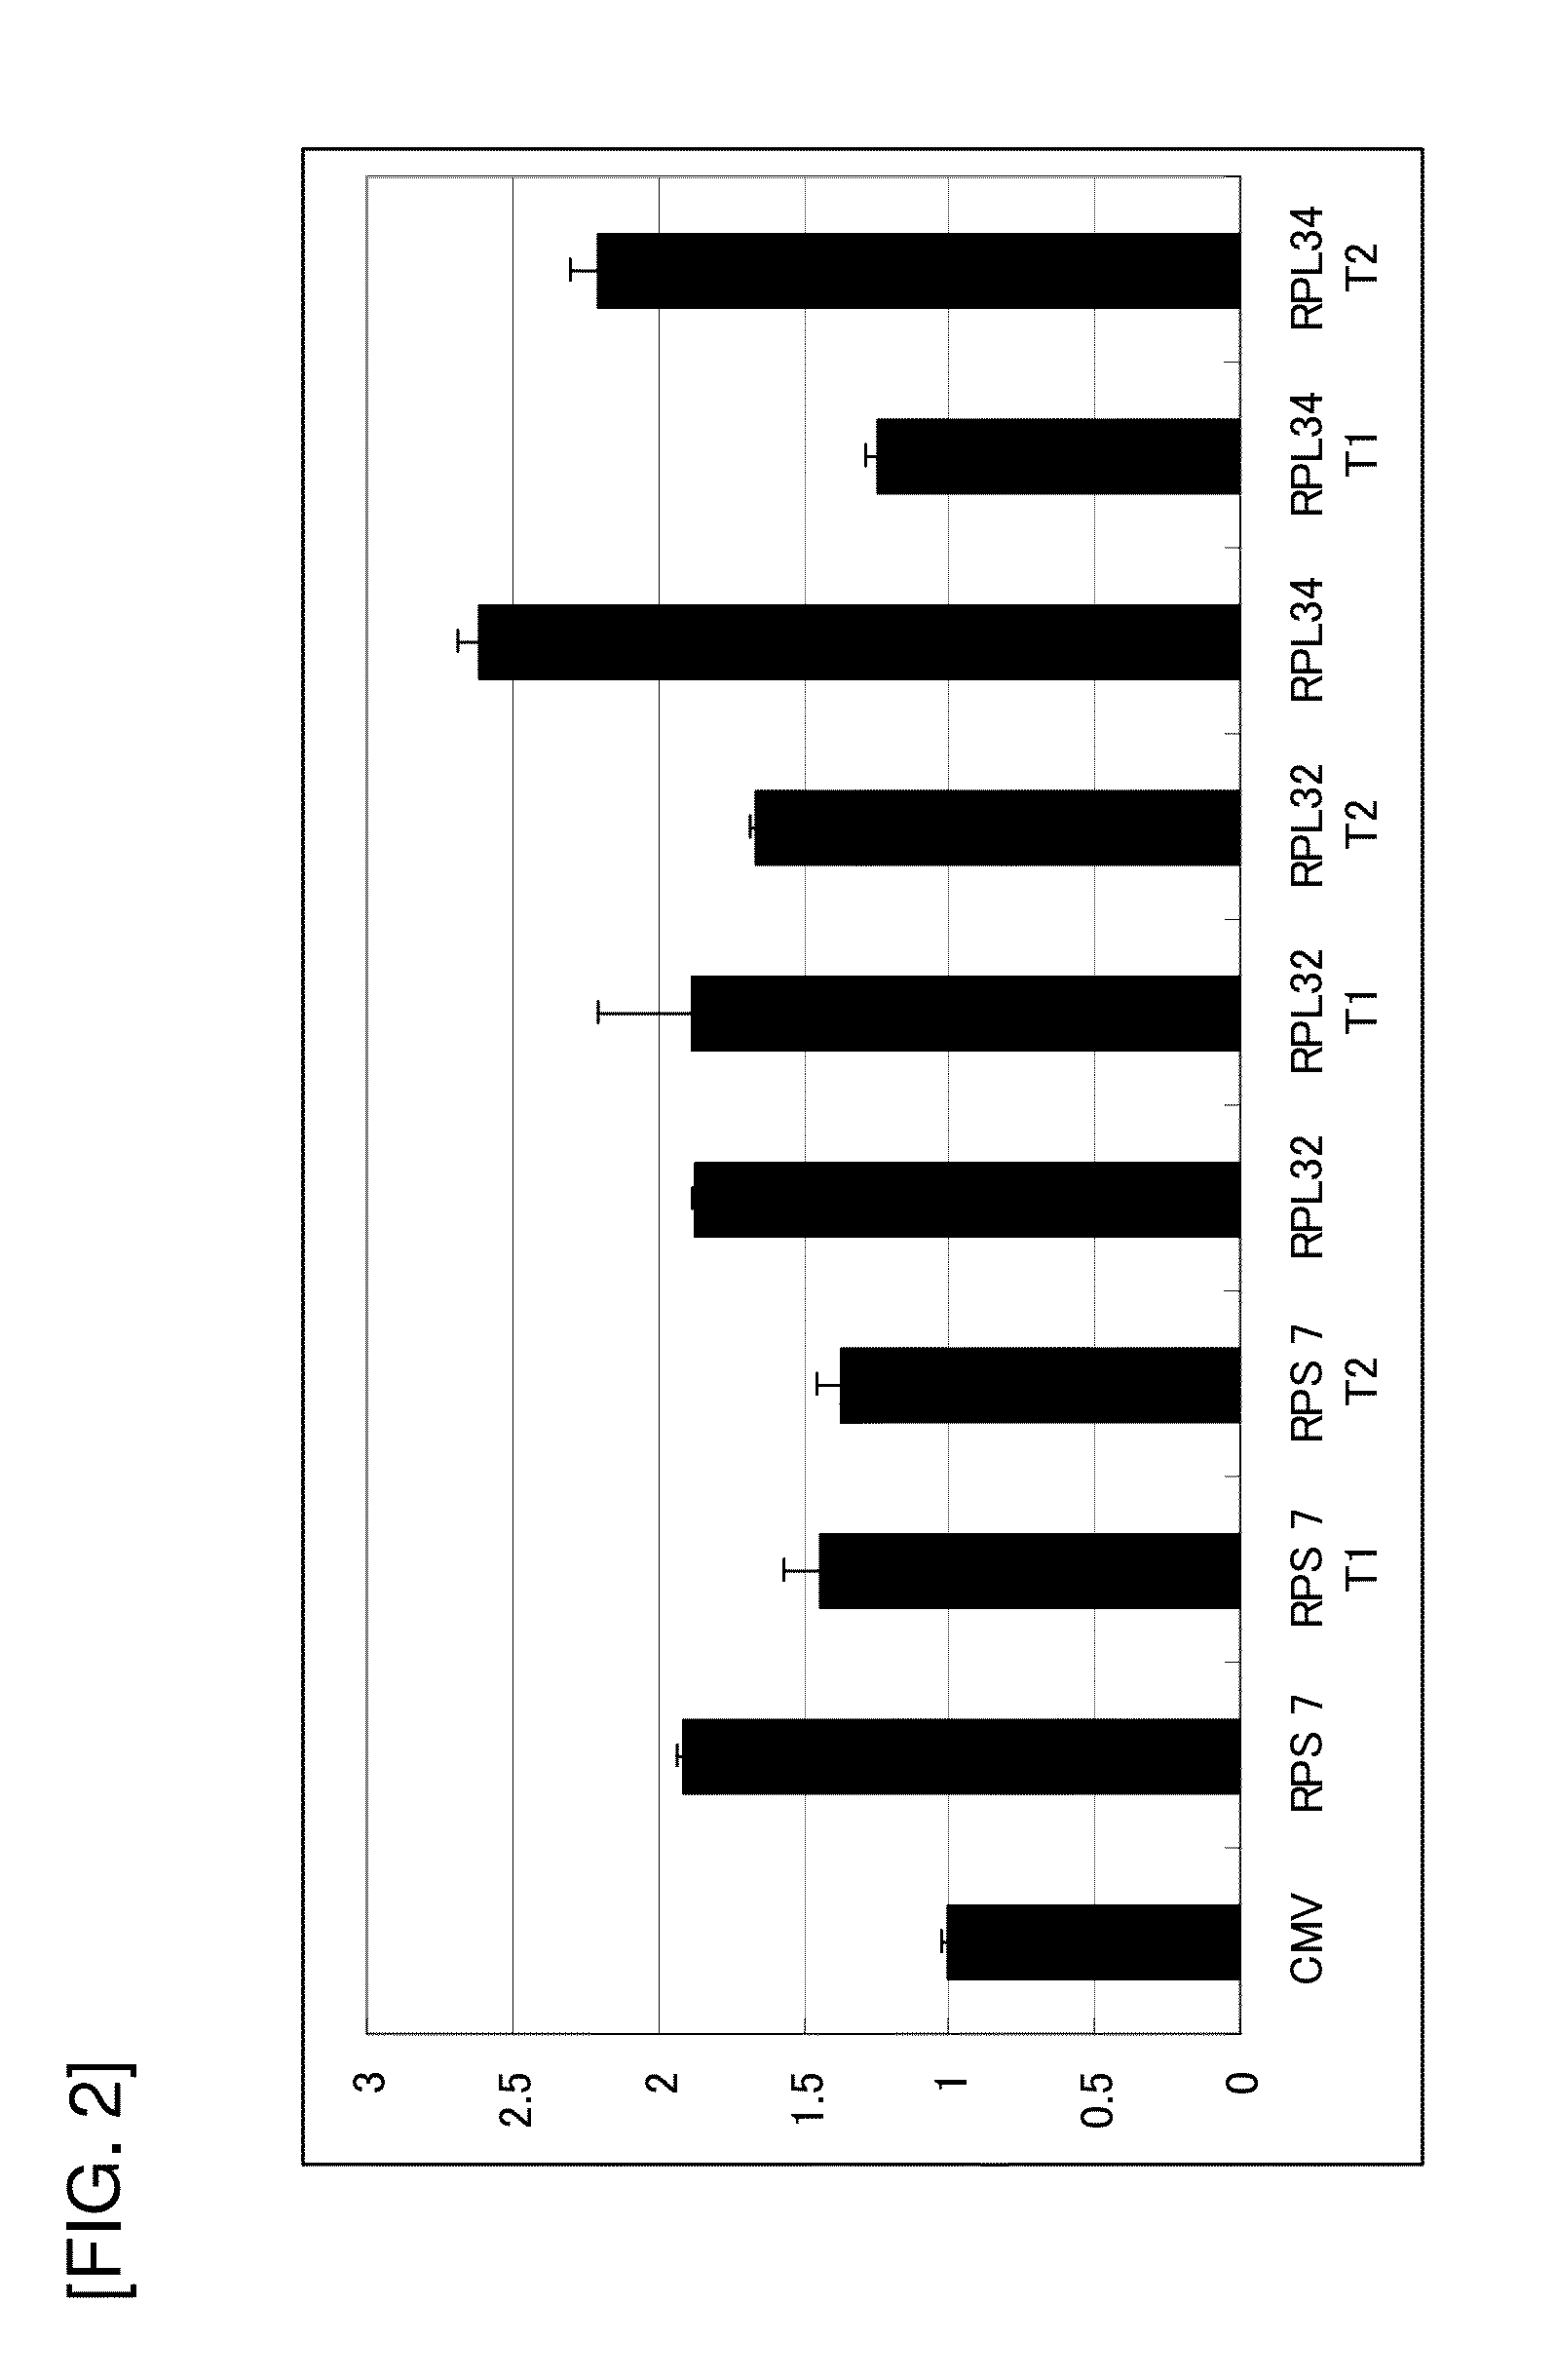 Promoter derived from human gene